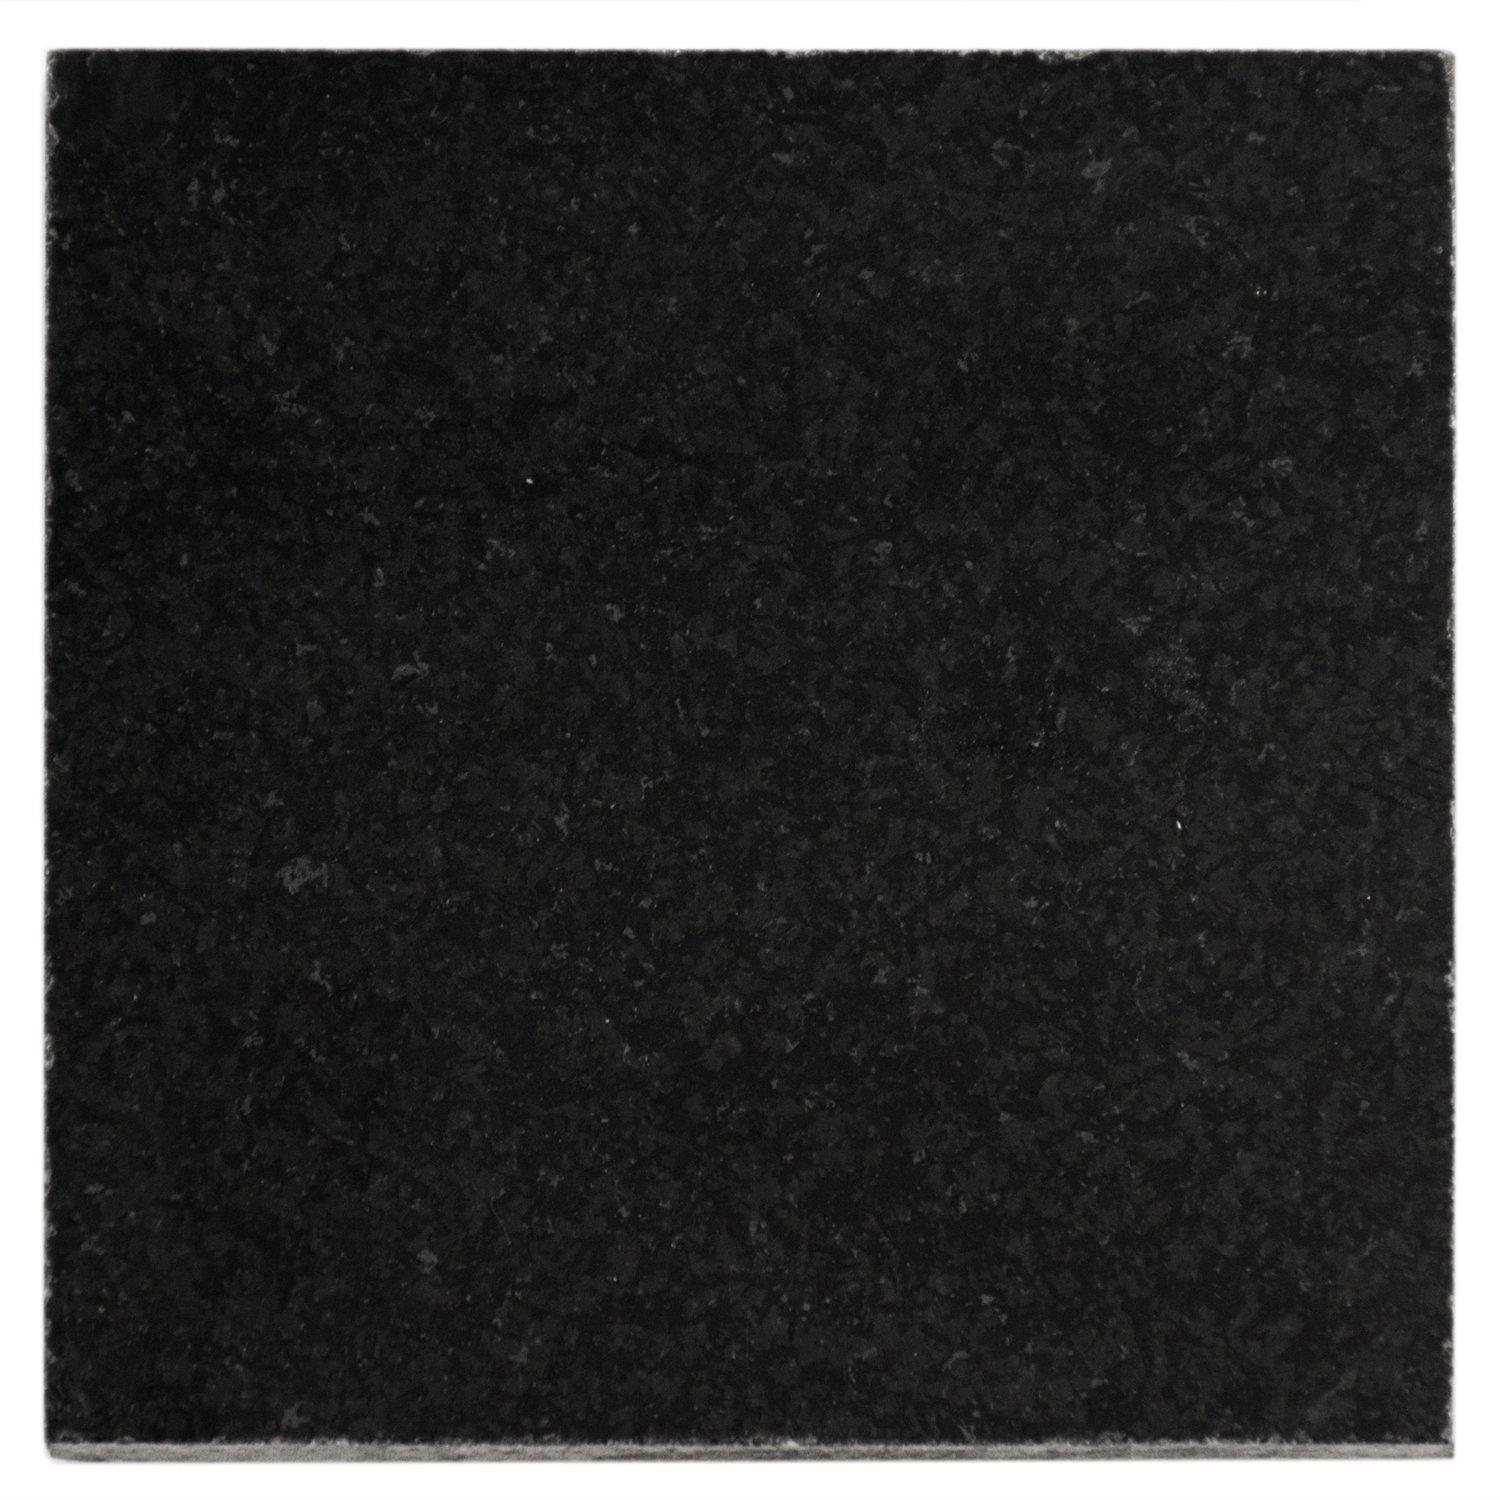 Absolute Black Polished Granite Tile - 4 x 4 - 931100284 | Floor and Decor